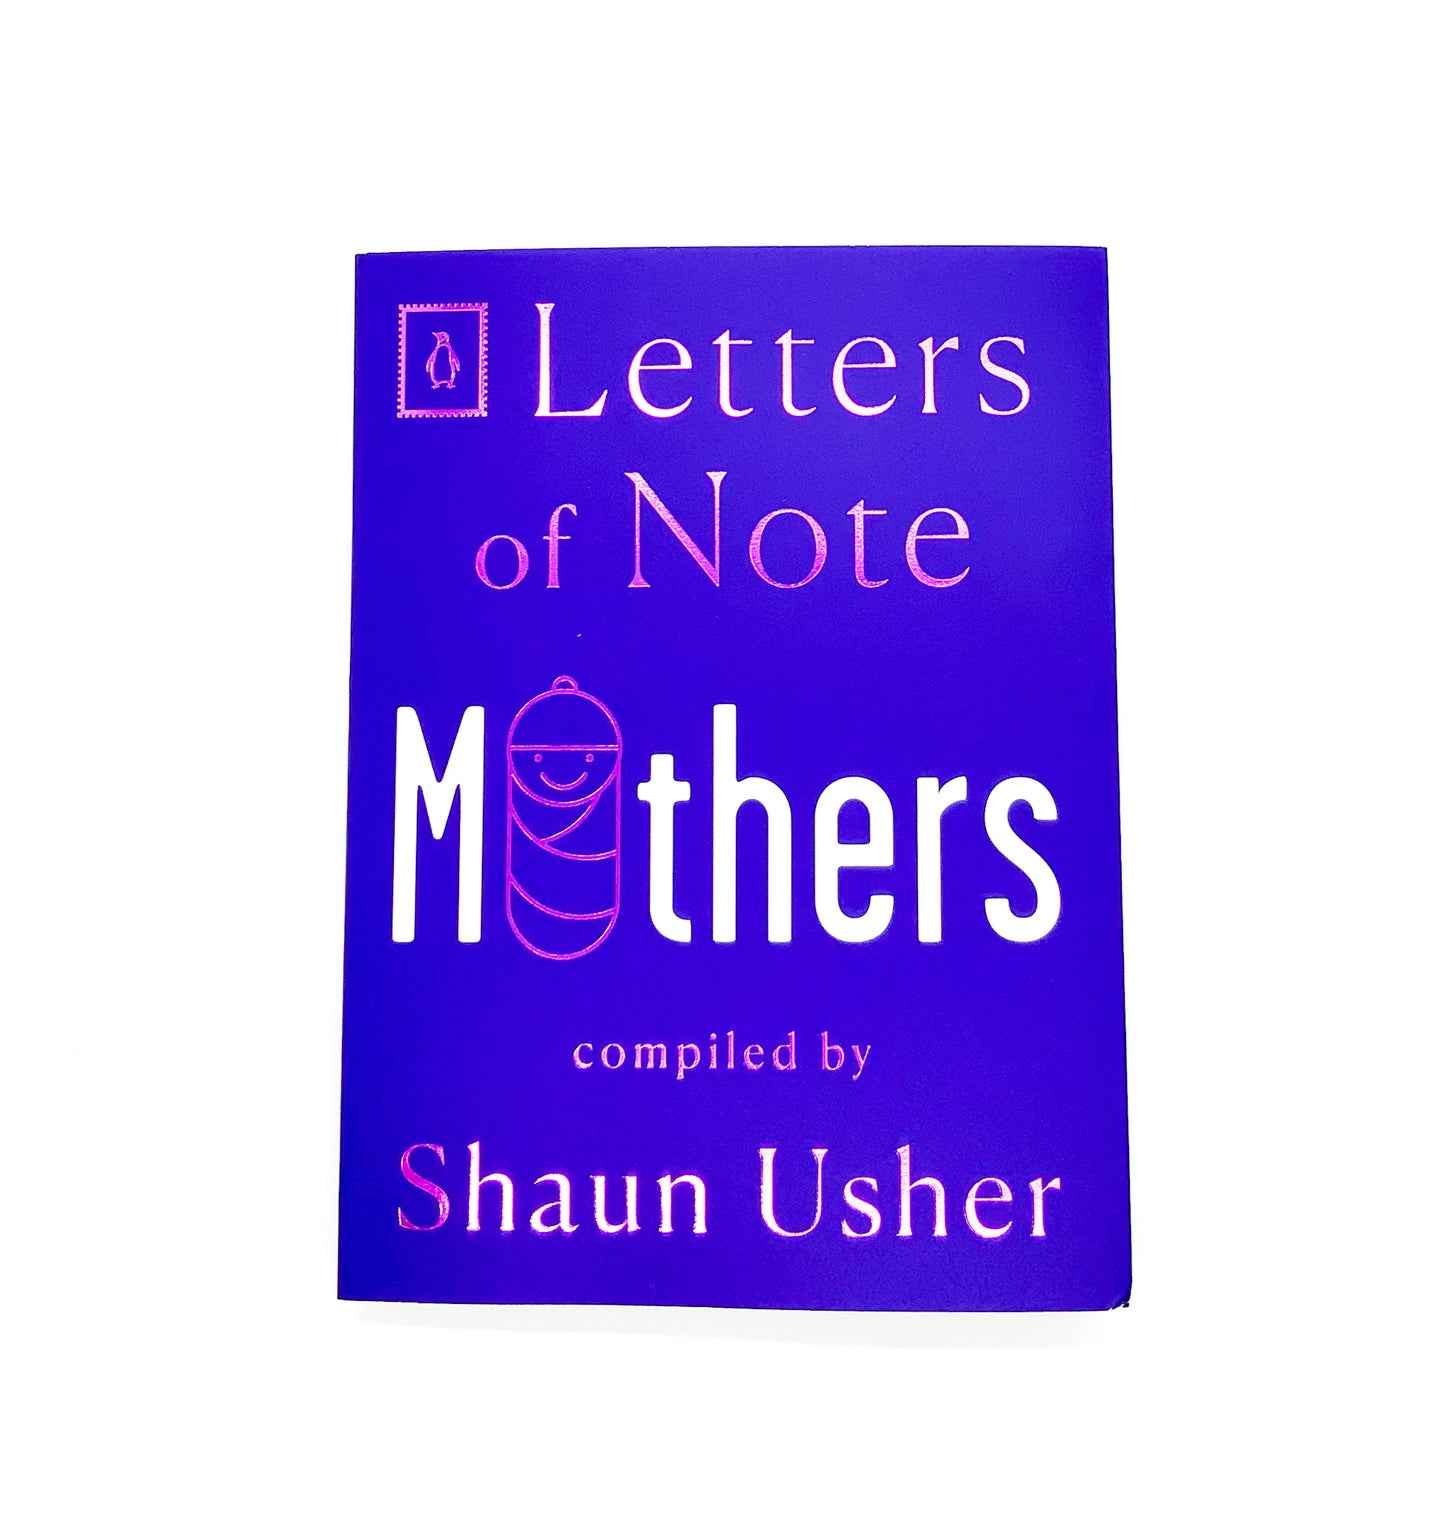 Letters of Note - Mothers